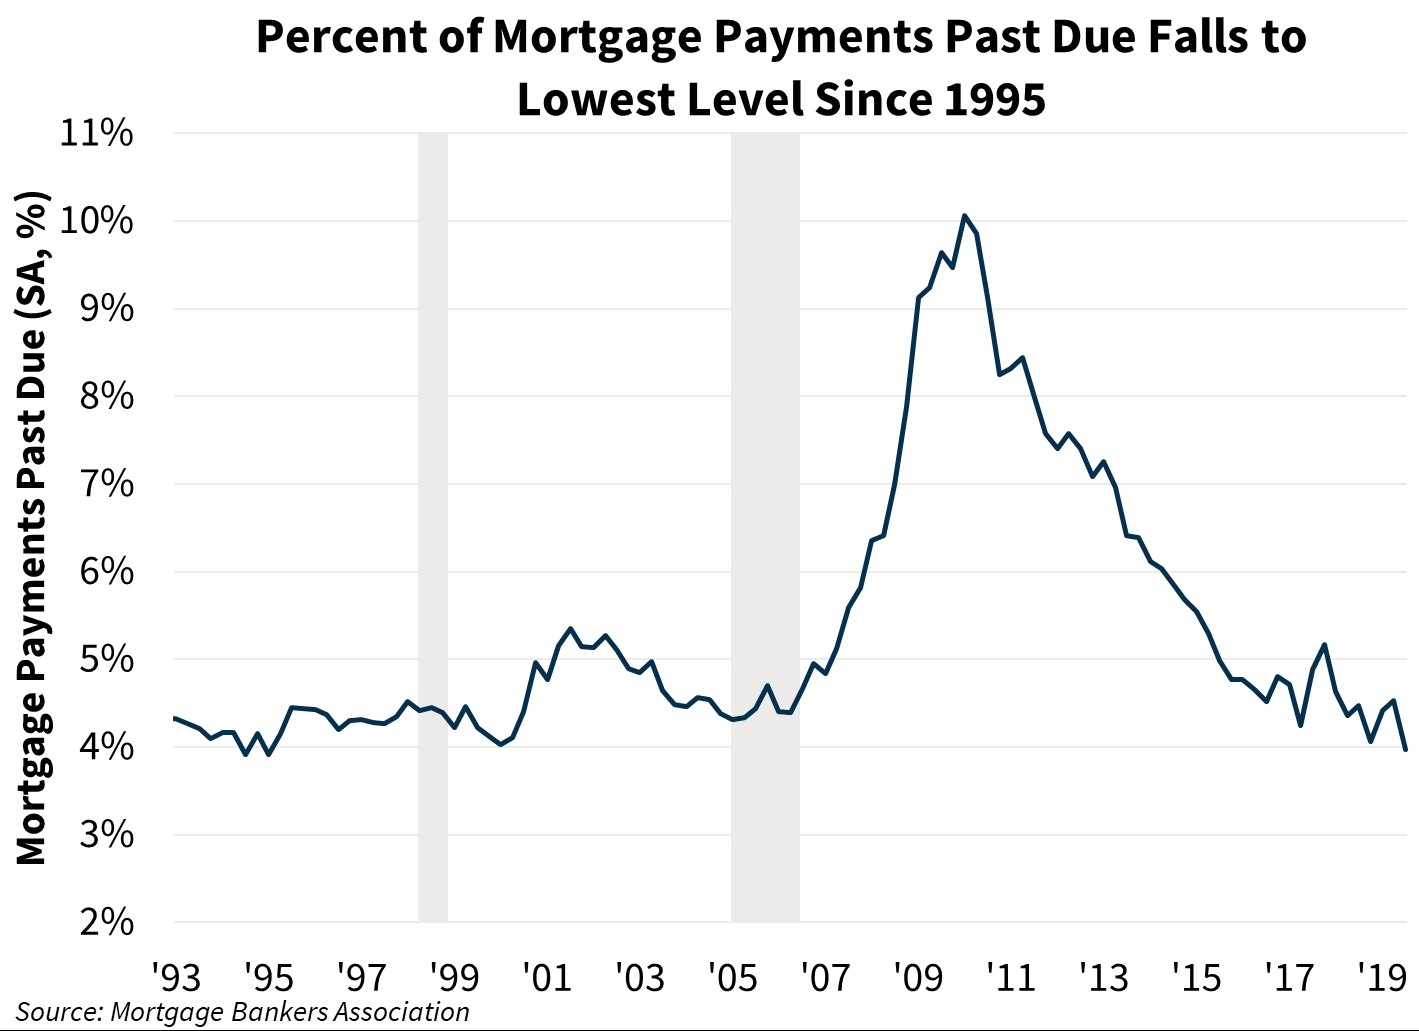 Percent of Mortgage Payments Past Due Falls to Lowest Level Since 1995